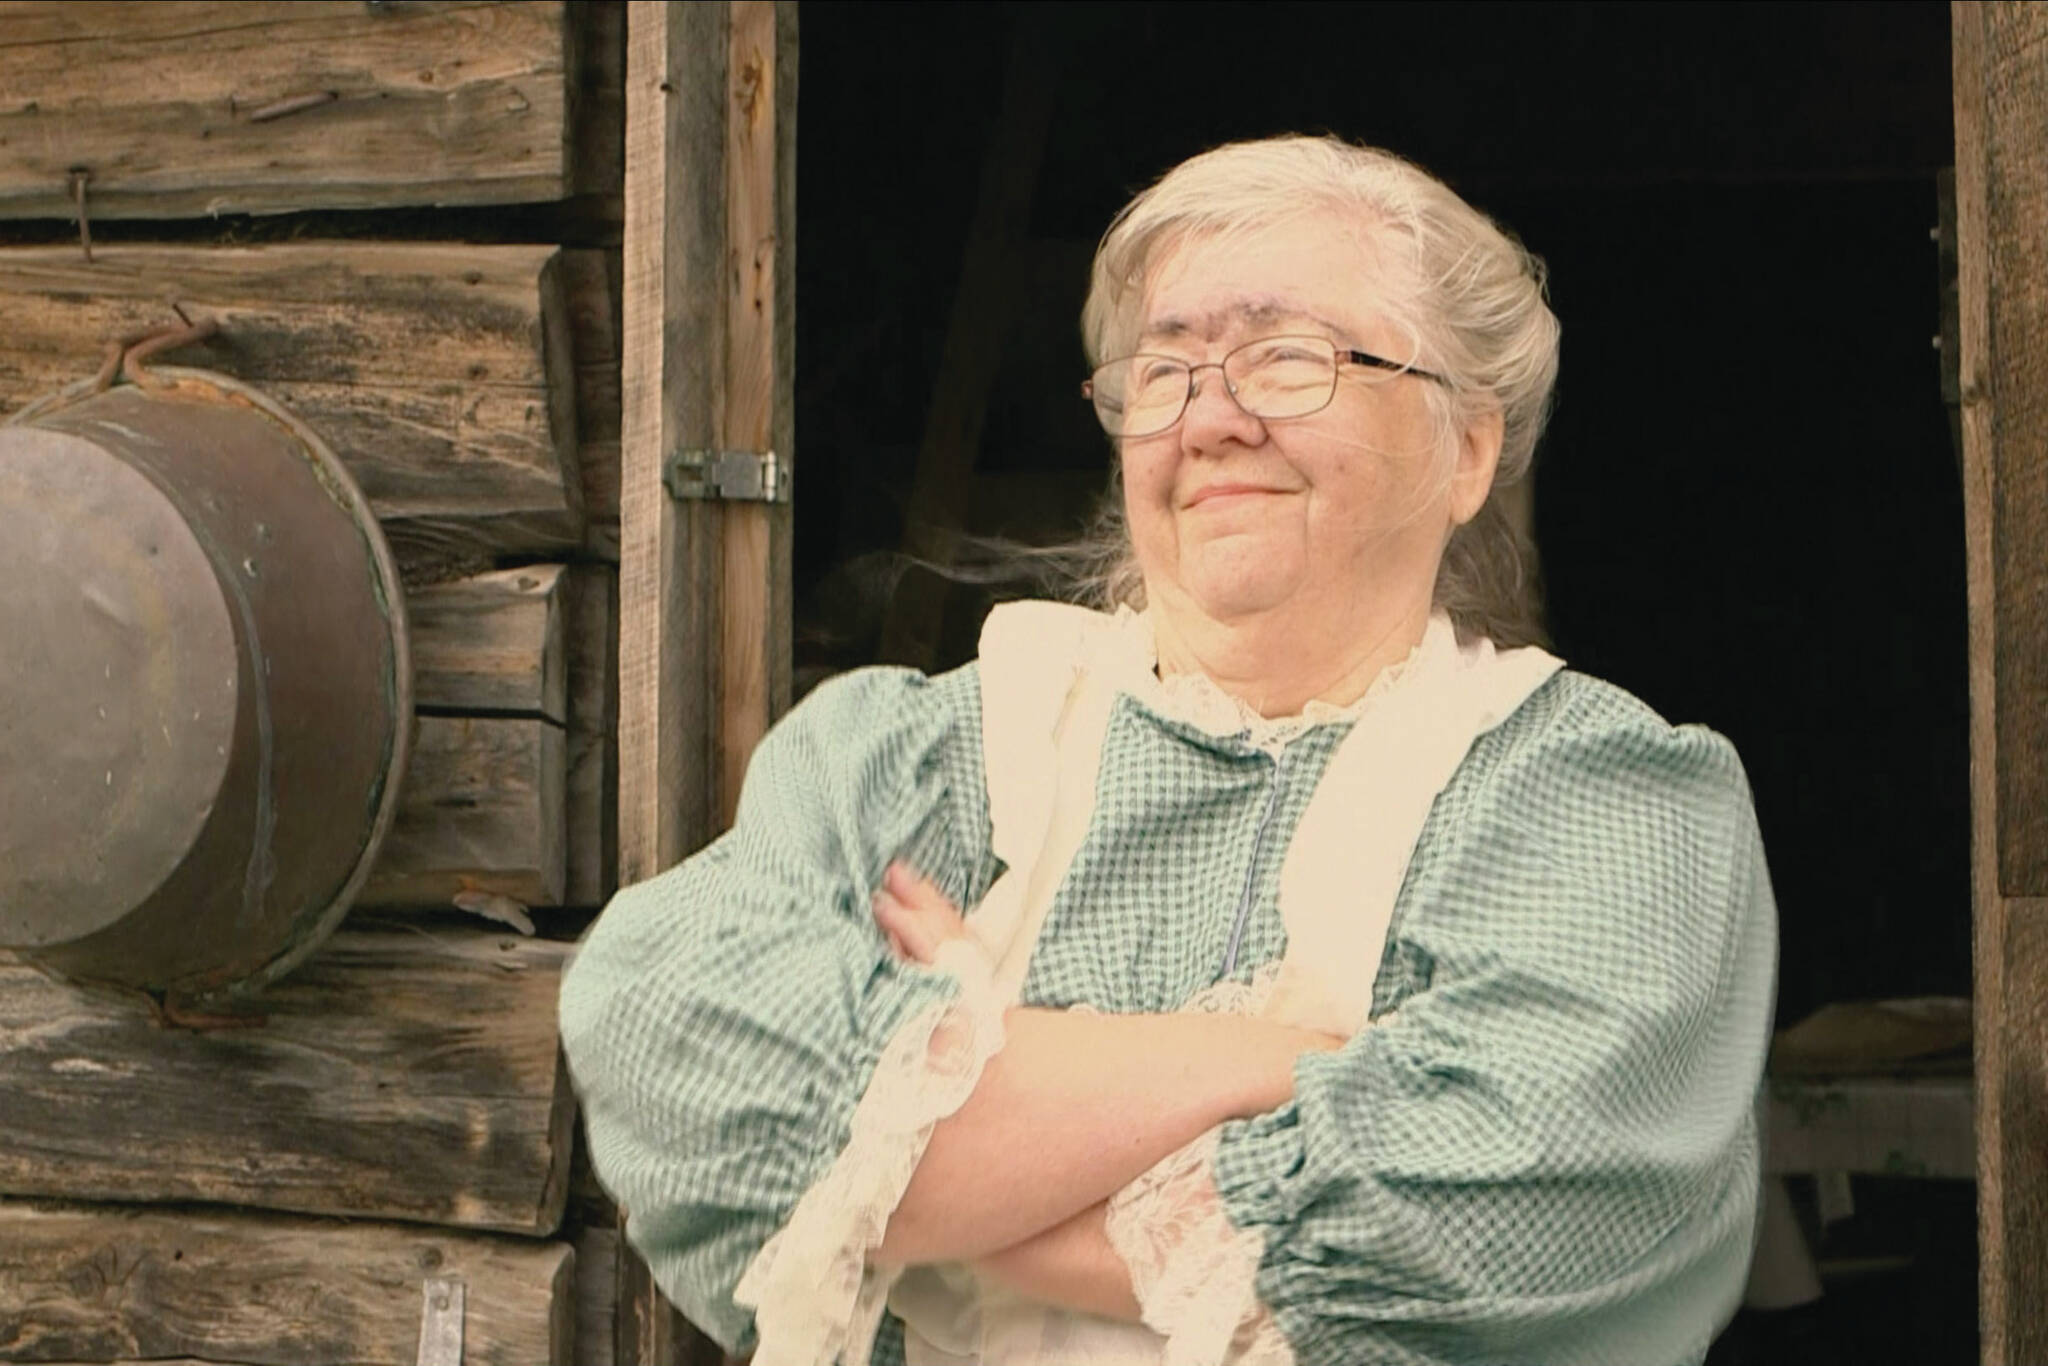 Carol Ford portrays Aunt Nancy in “Aunt Nancy and Old Man Trouble,” a short film by Raleigh Van Natta. (Photo courtesy Raleigh Van Natta)